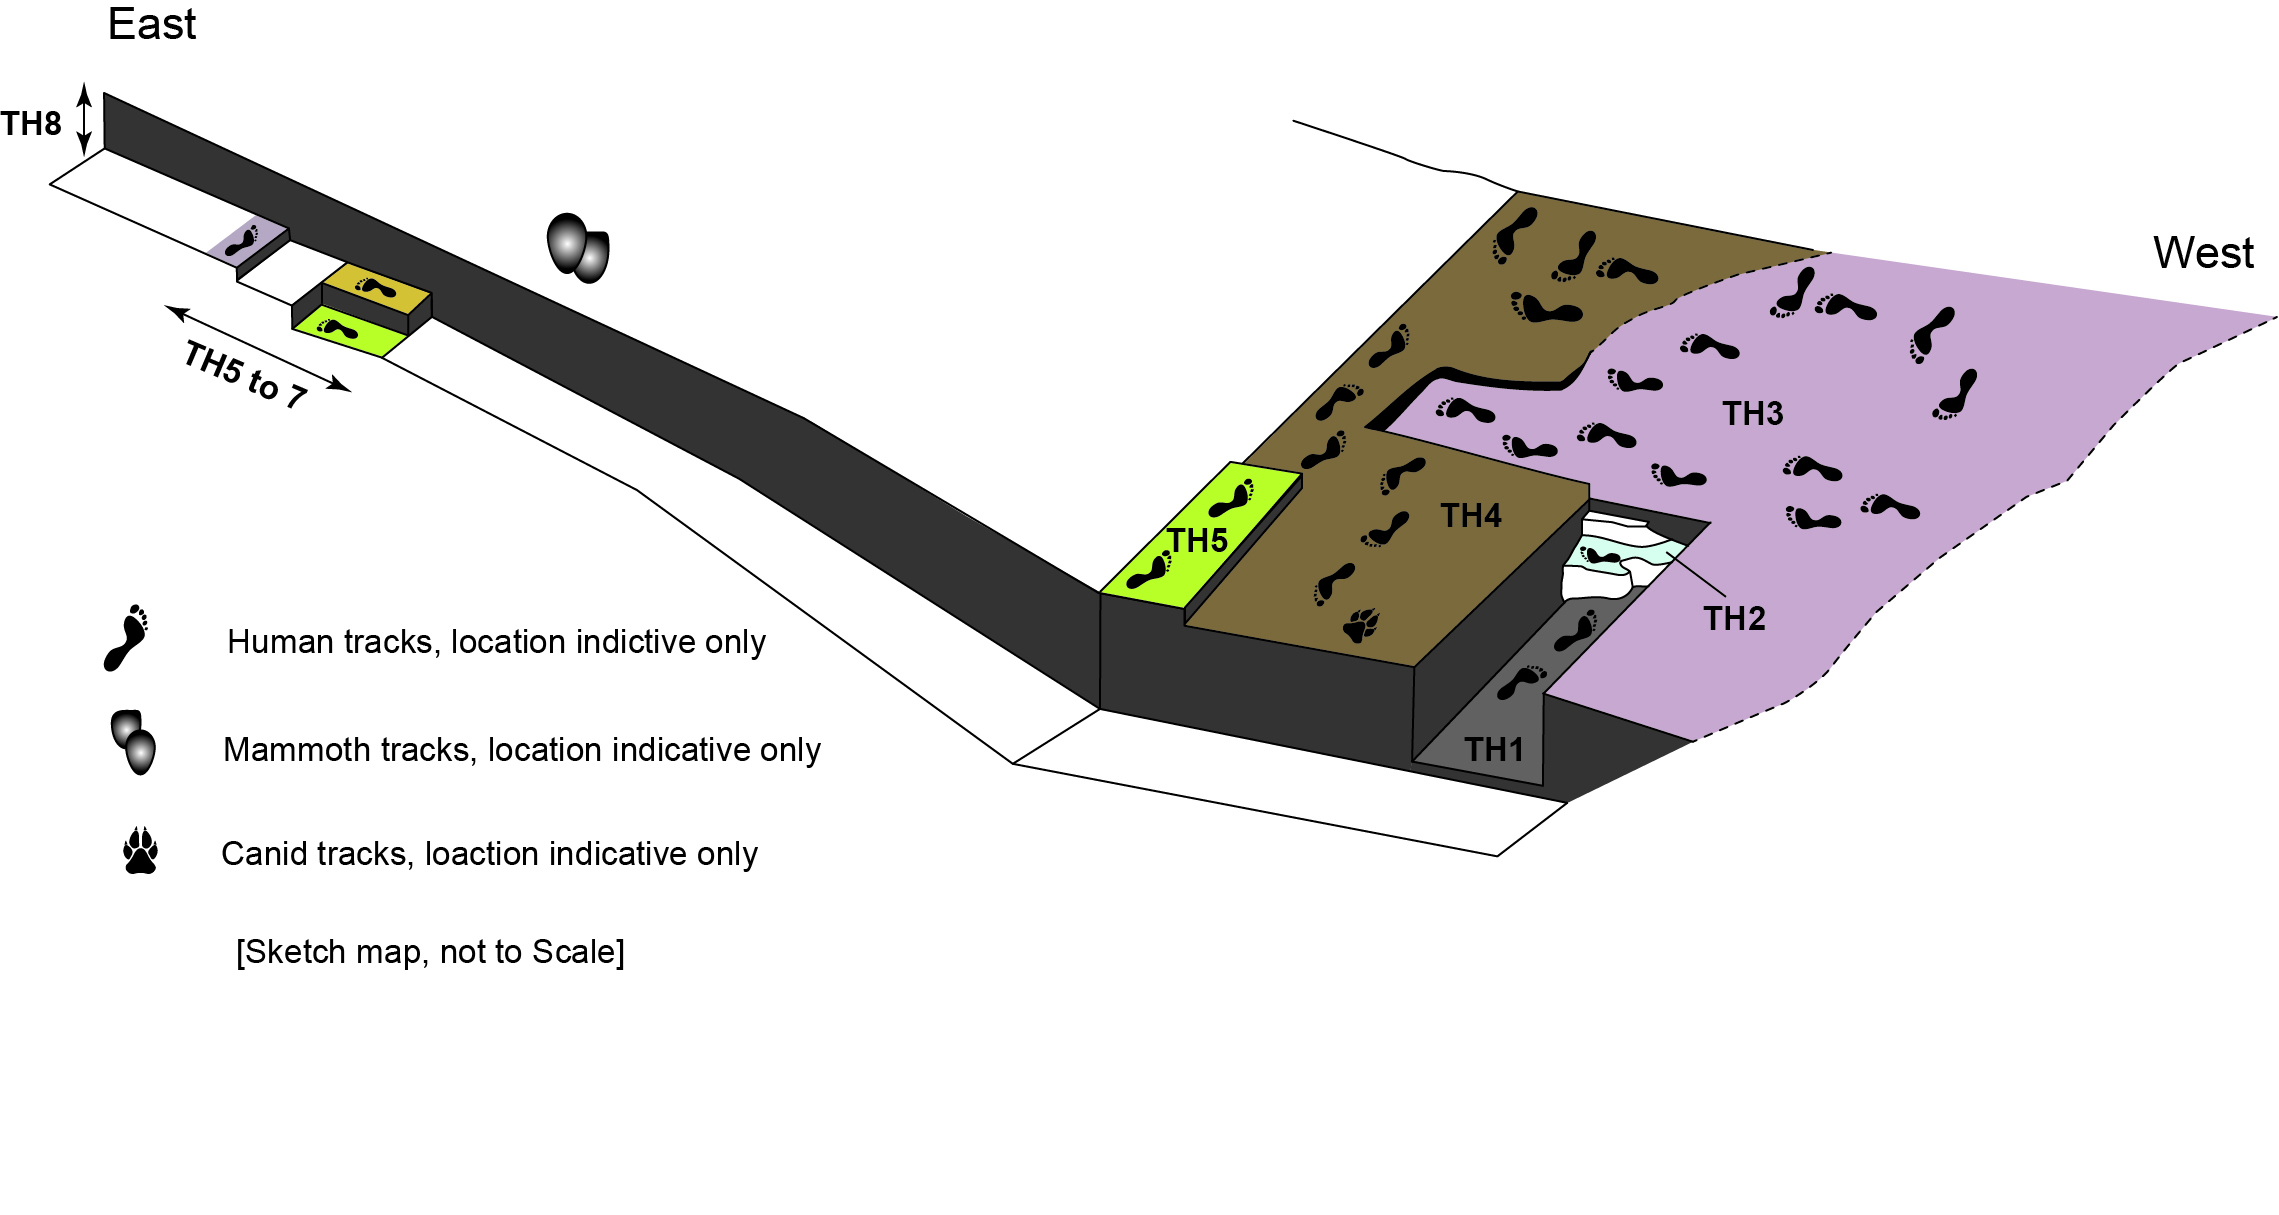 A schematic map displays the location of human and animal tracks in relation to sedimentary layers at the excavation site. The sedimentary layers are color coded and the tracks of humans, mammoths, and canids are individually marked. 